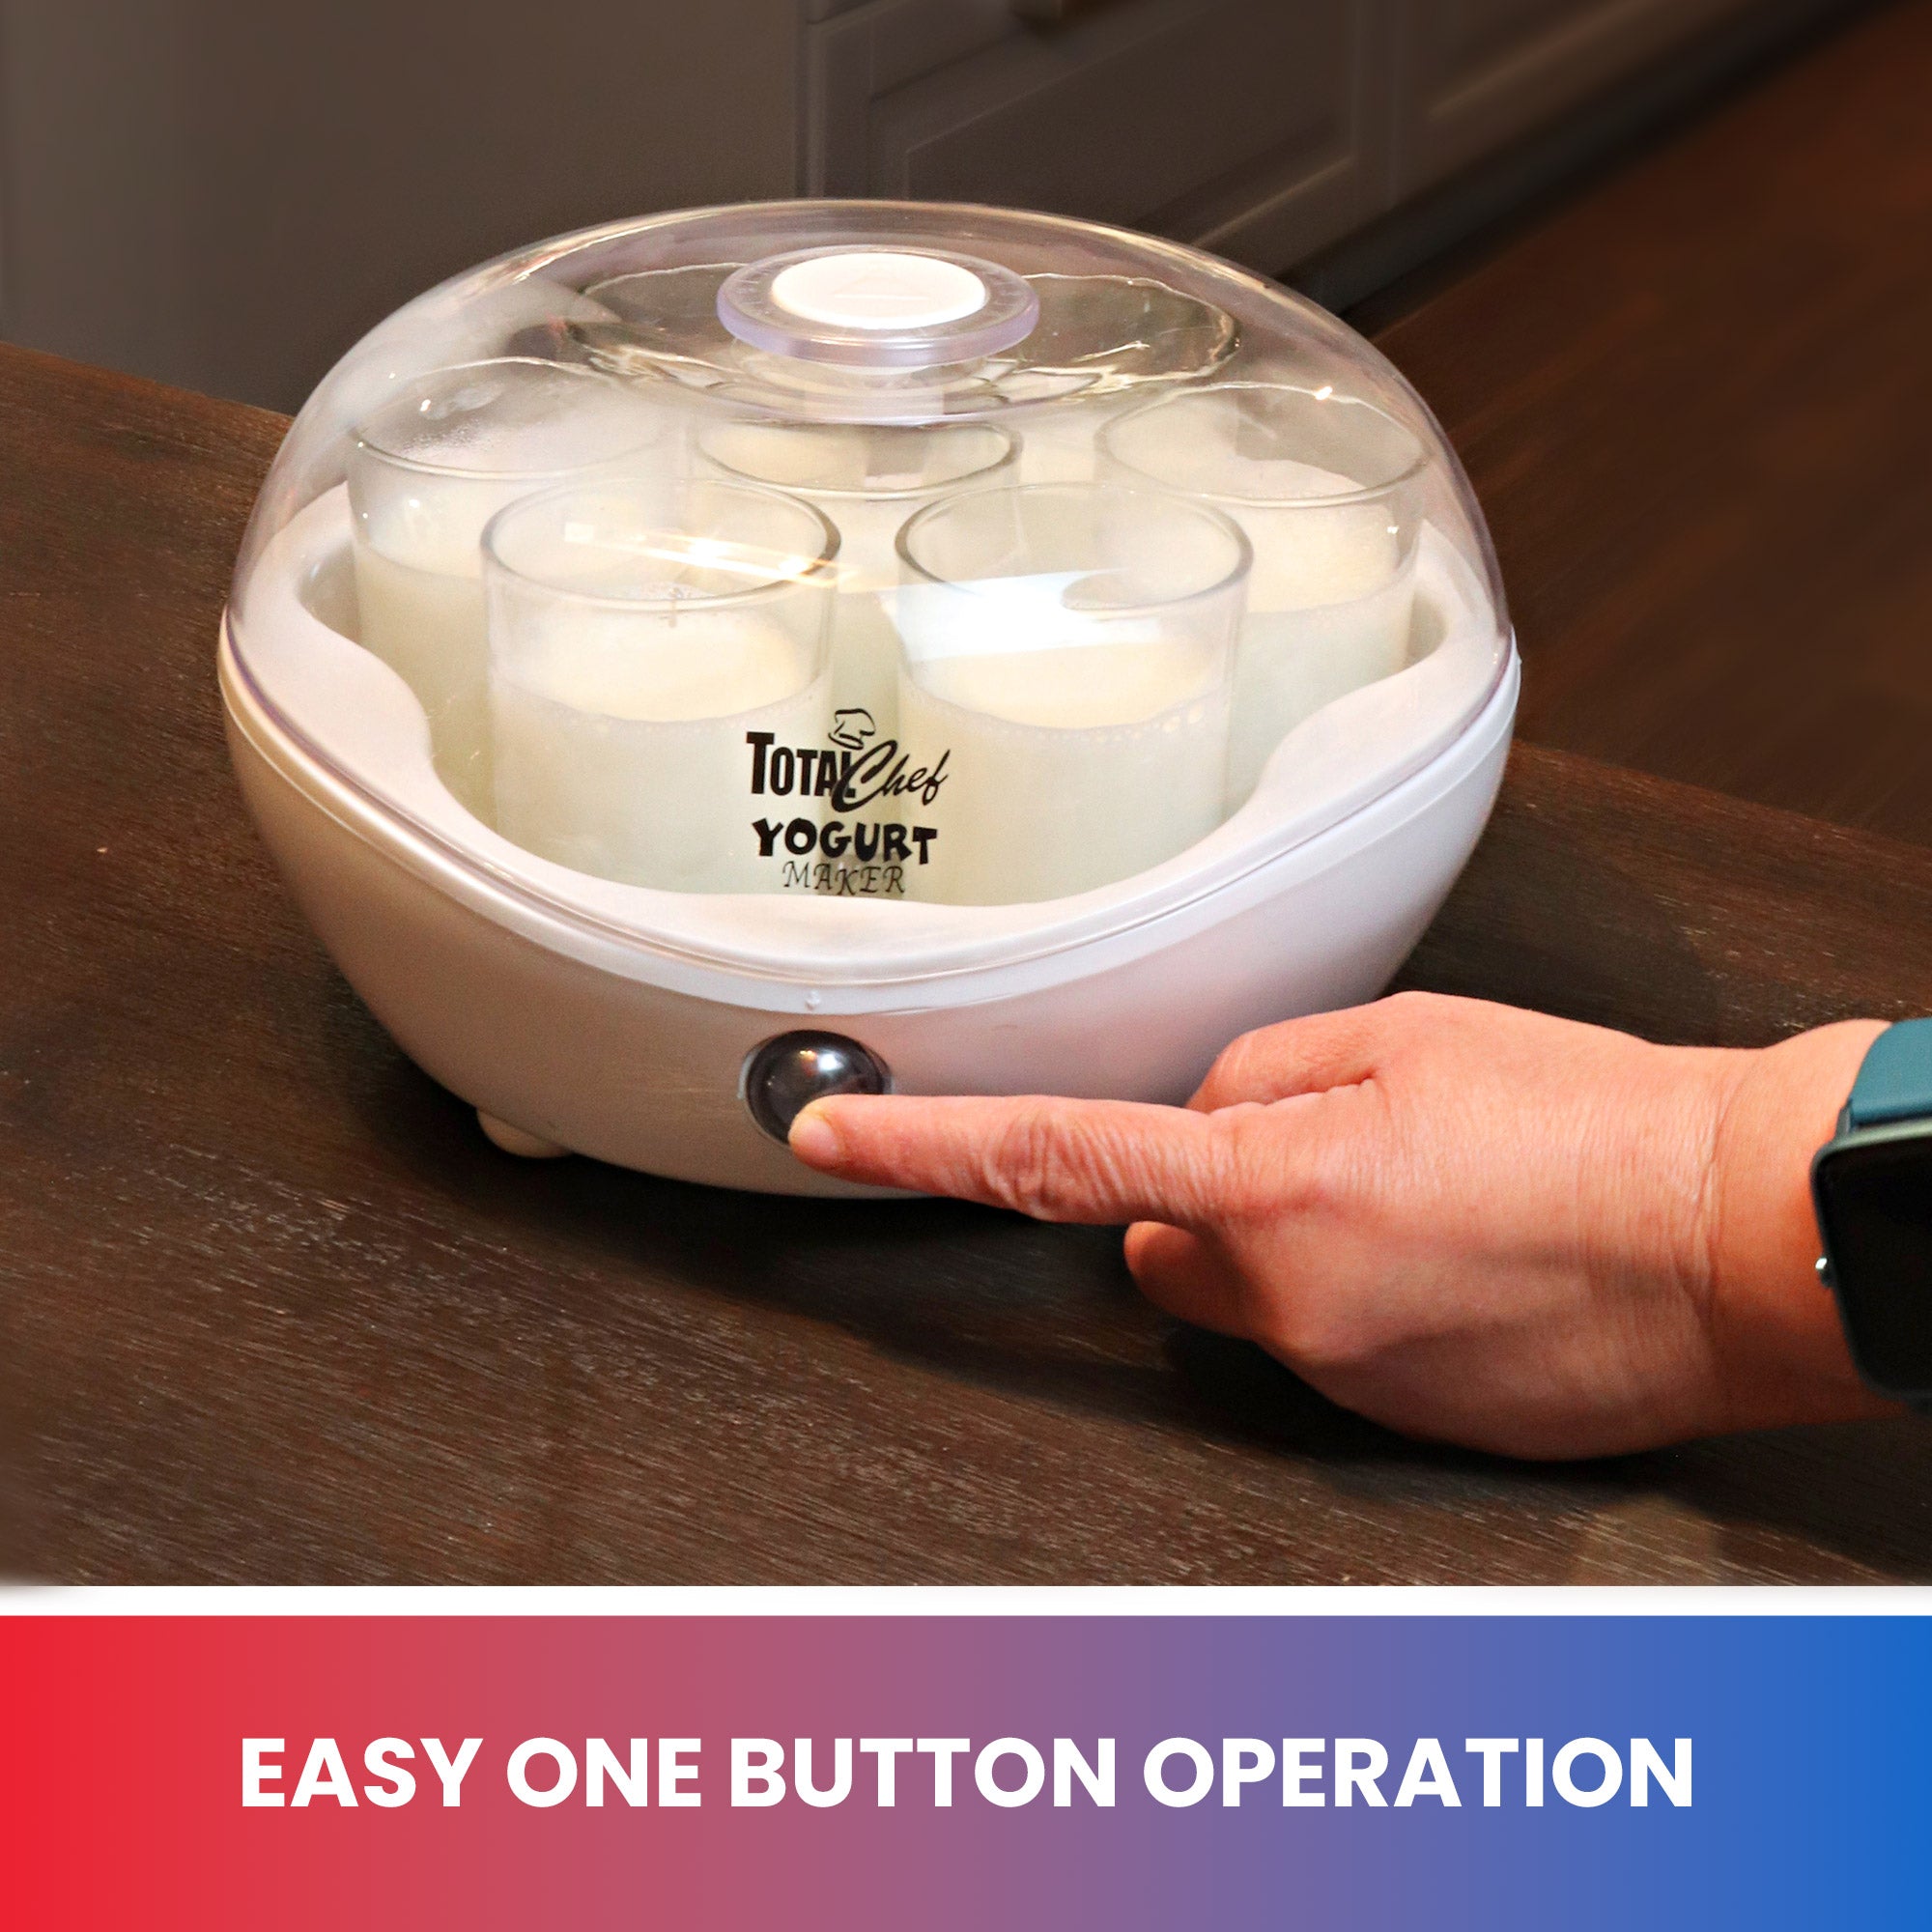 Lifestyle image of the closed yogurt maker with jars of milk mixture inside on a dark brown tabletop, and a person's finger pushing the power button. Text below reads, "Easy one button operation"